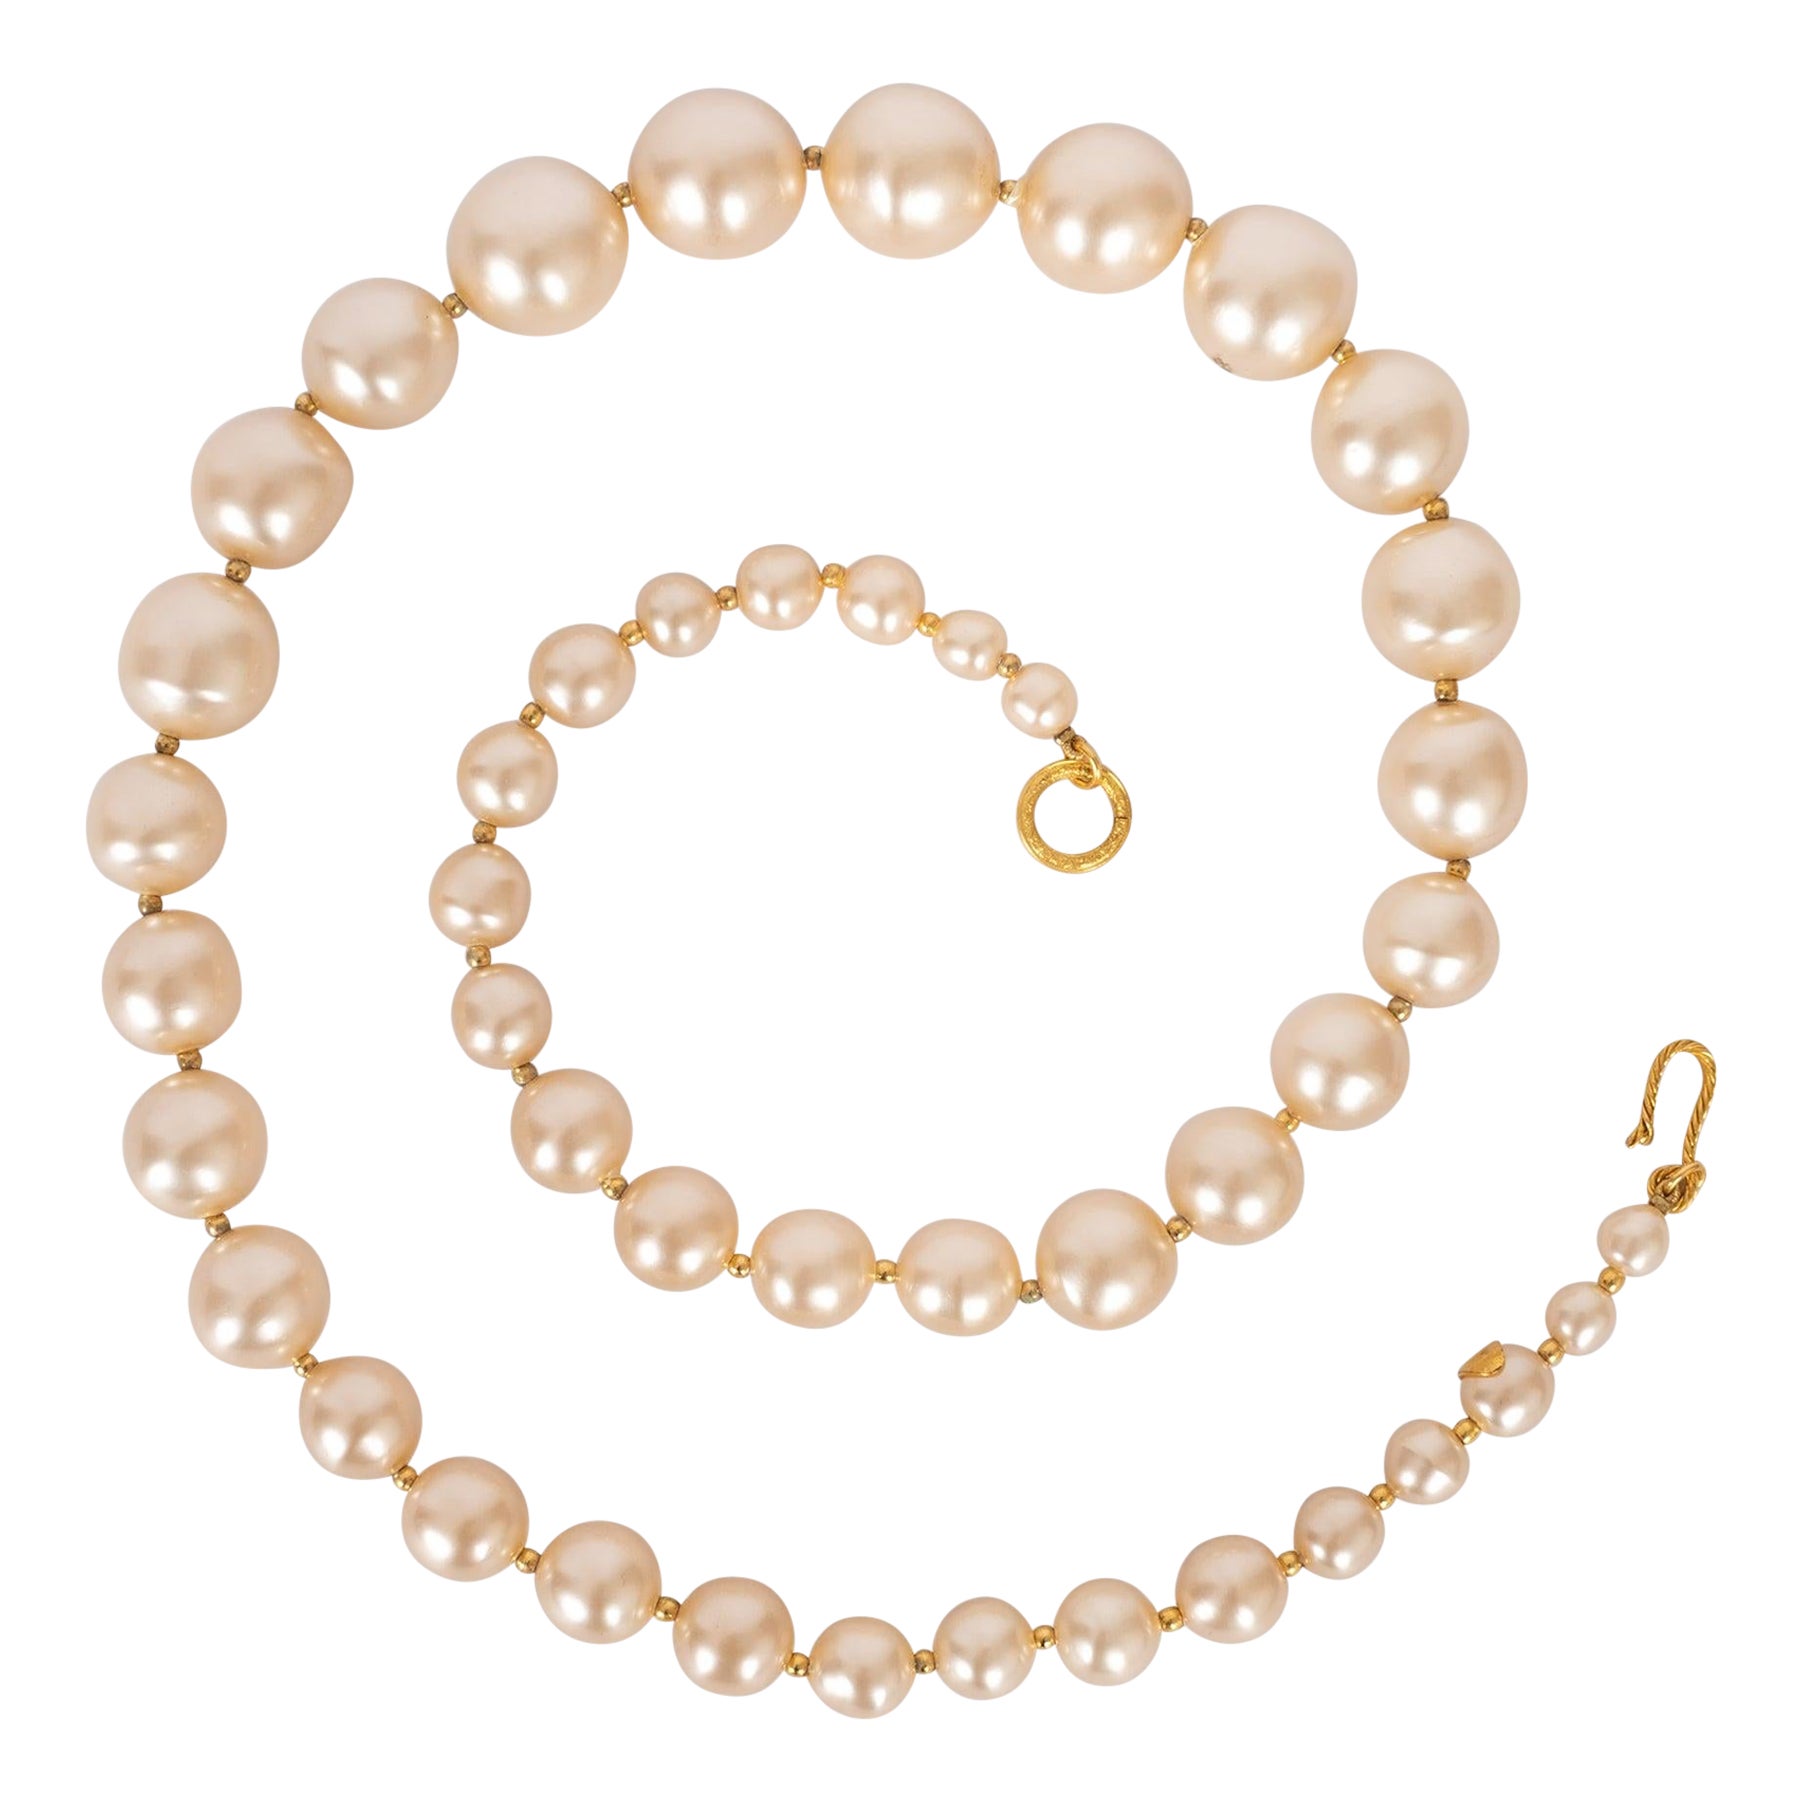 Chanel Necklace in Costume Pearly Beads and Gold-Plated Metal, 1990s